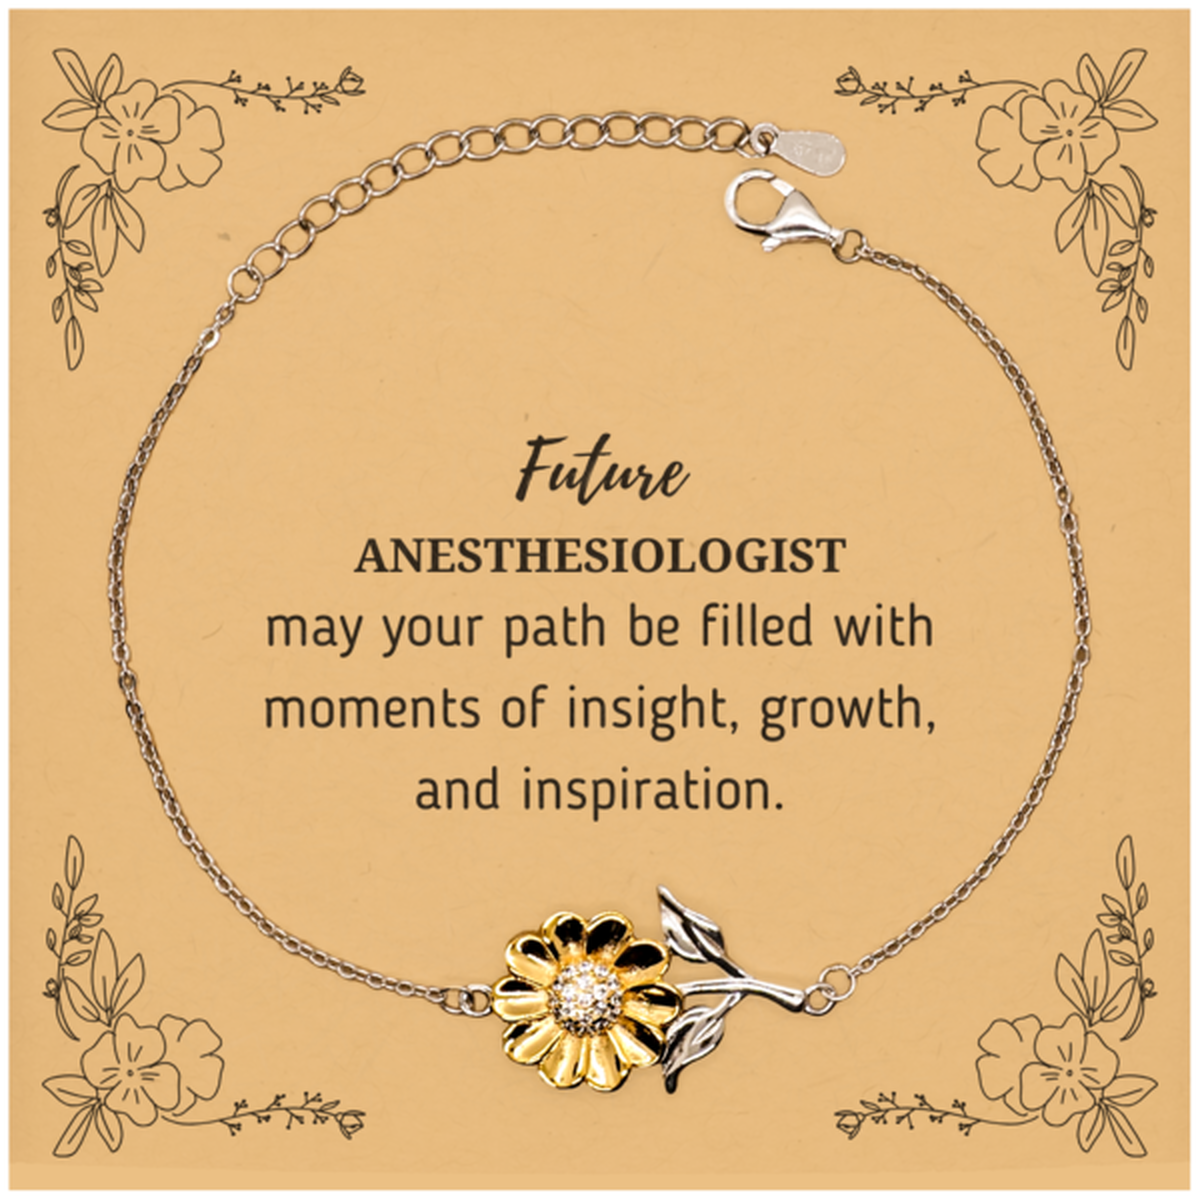 Future Anesthesiologist Gifts, May your path be filled with moments of insight, Graduation Gifts for New Anesthesiologist, Christmas Unique Sunflower Bracelet For Men, Women, Friends